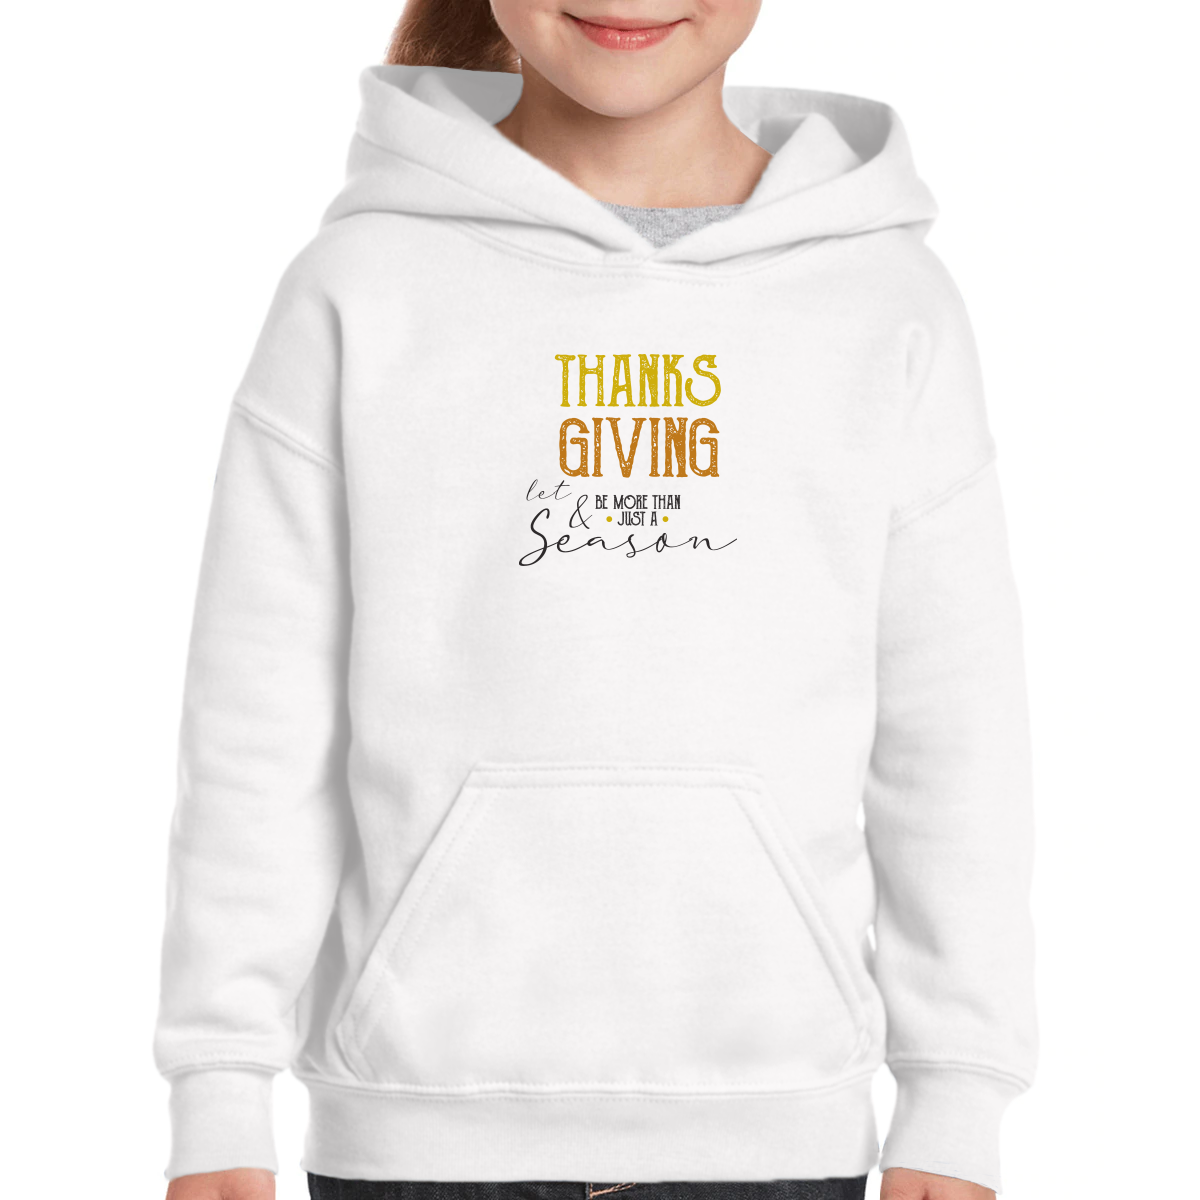 Thanks and Giving  Kids Hoodie | White